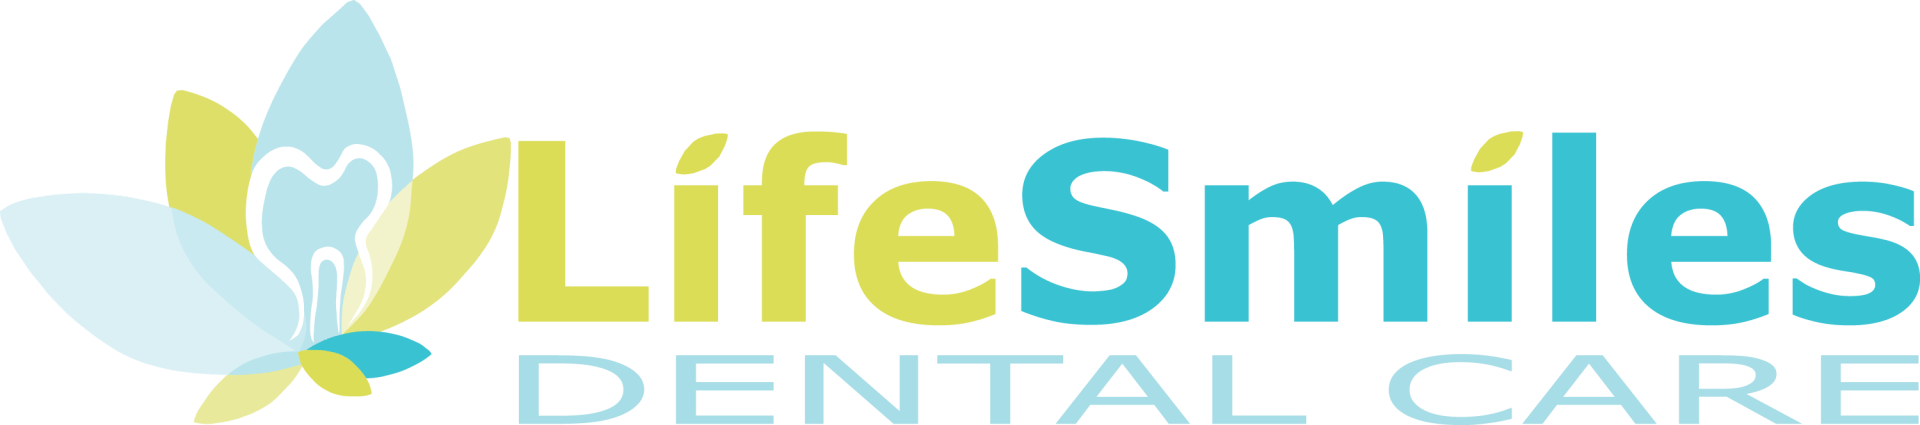 the logo for life smiles dental care has a butterfly on it .